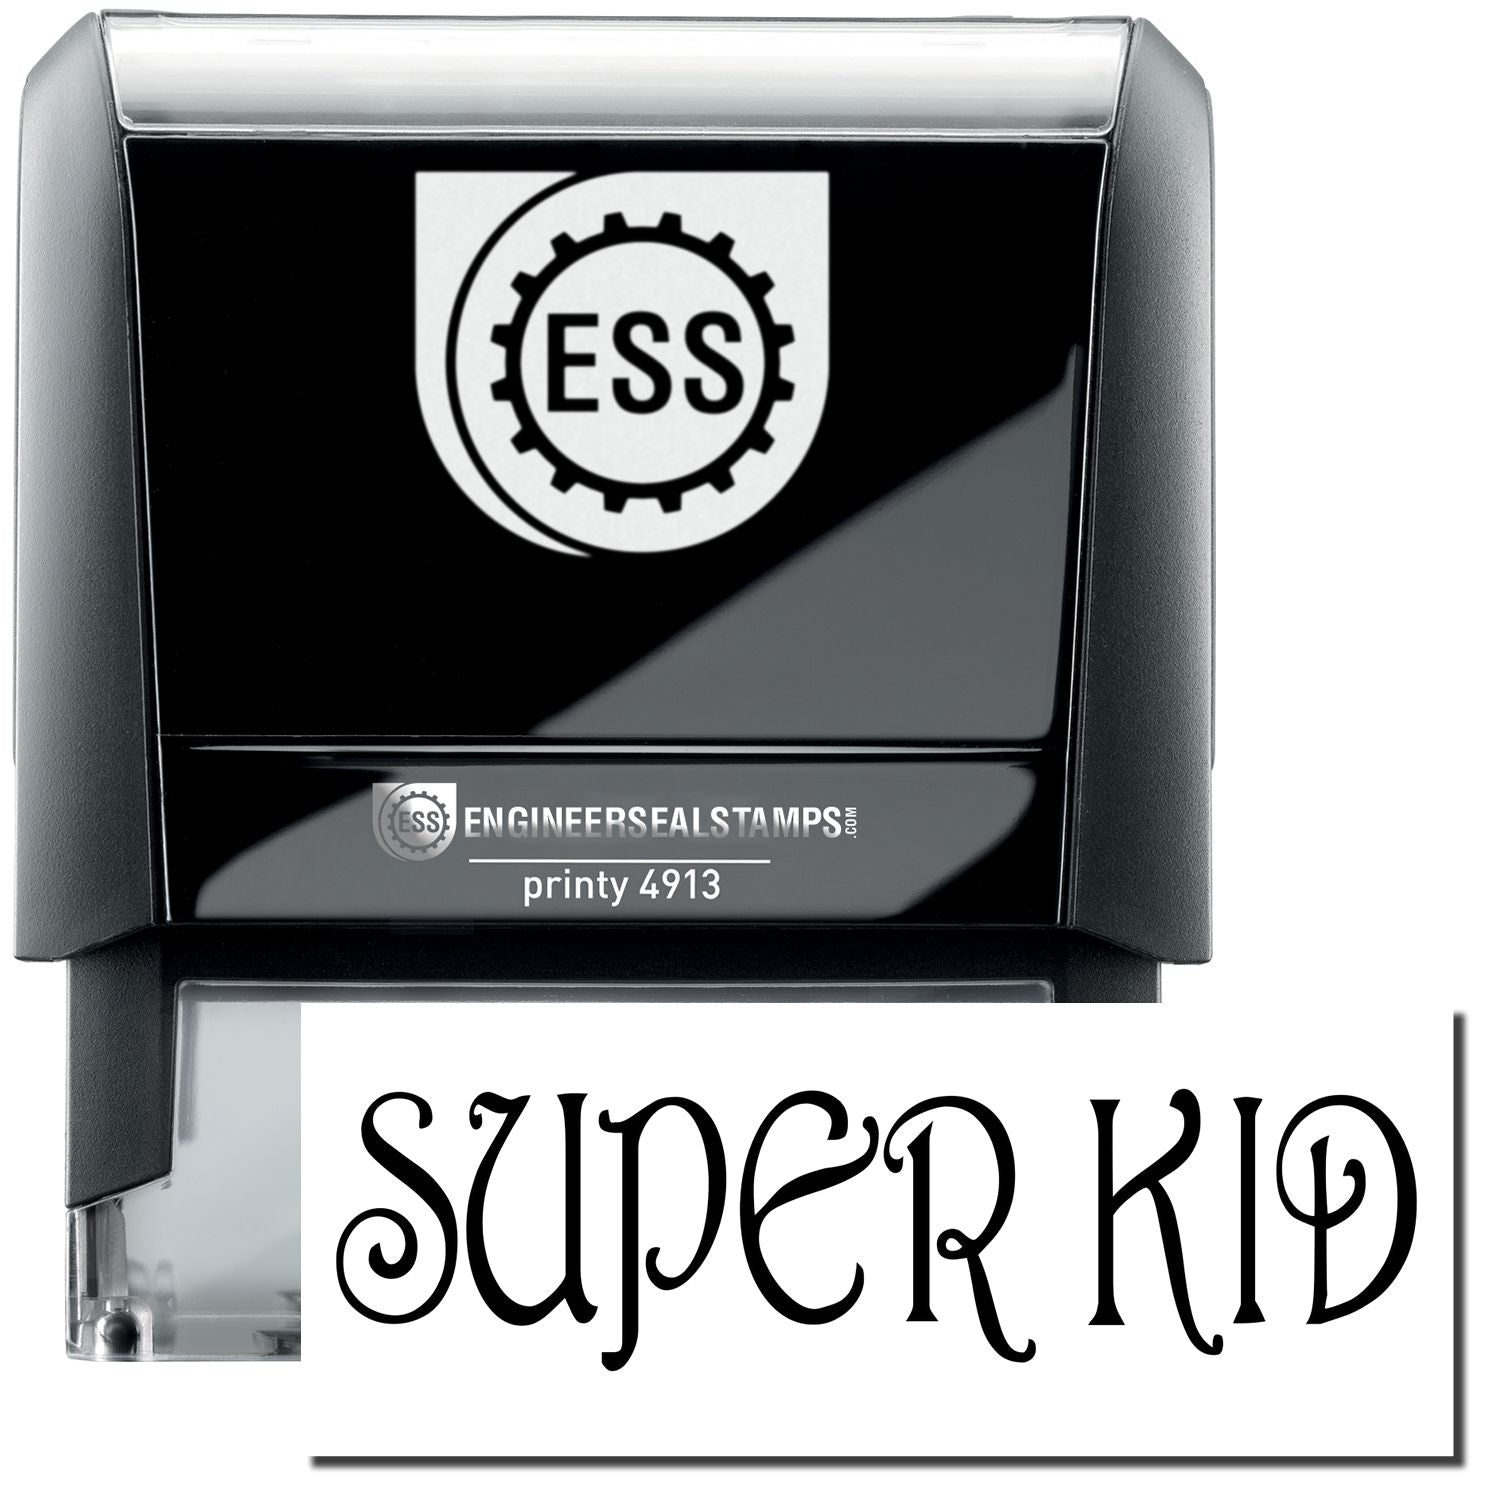 A self-inking stamp with a stamped image showing how the text "SUPER KID" in a large unique font is displayed by it.